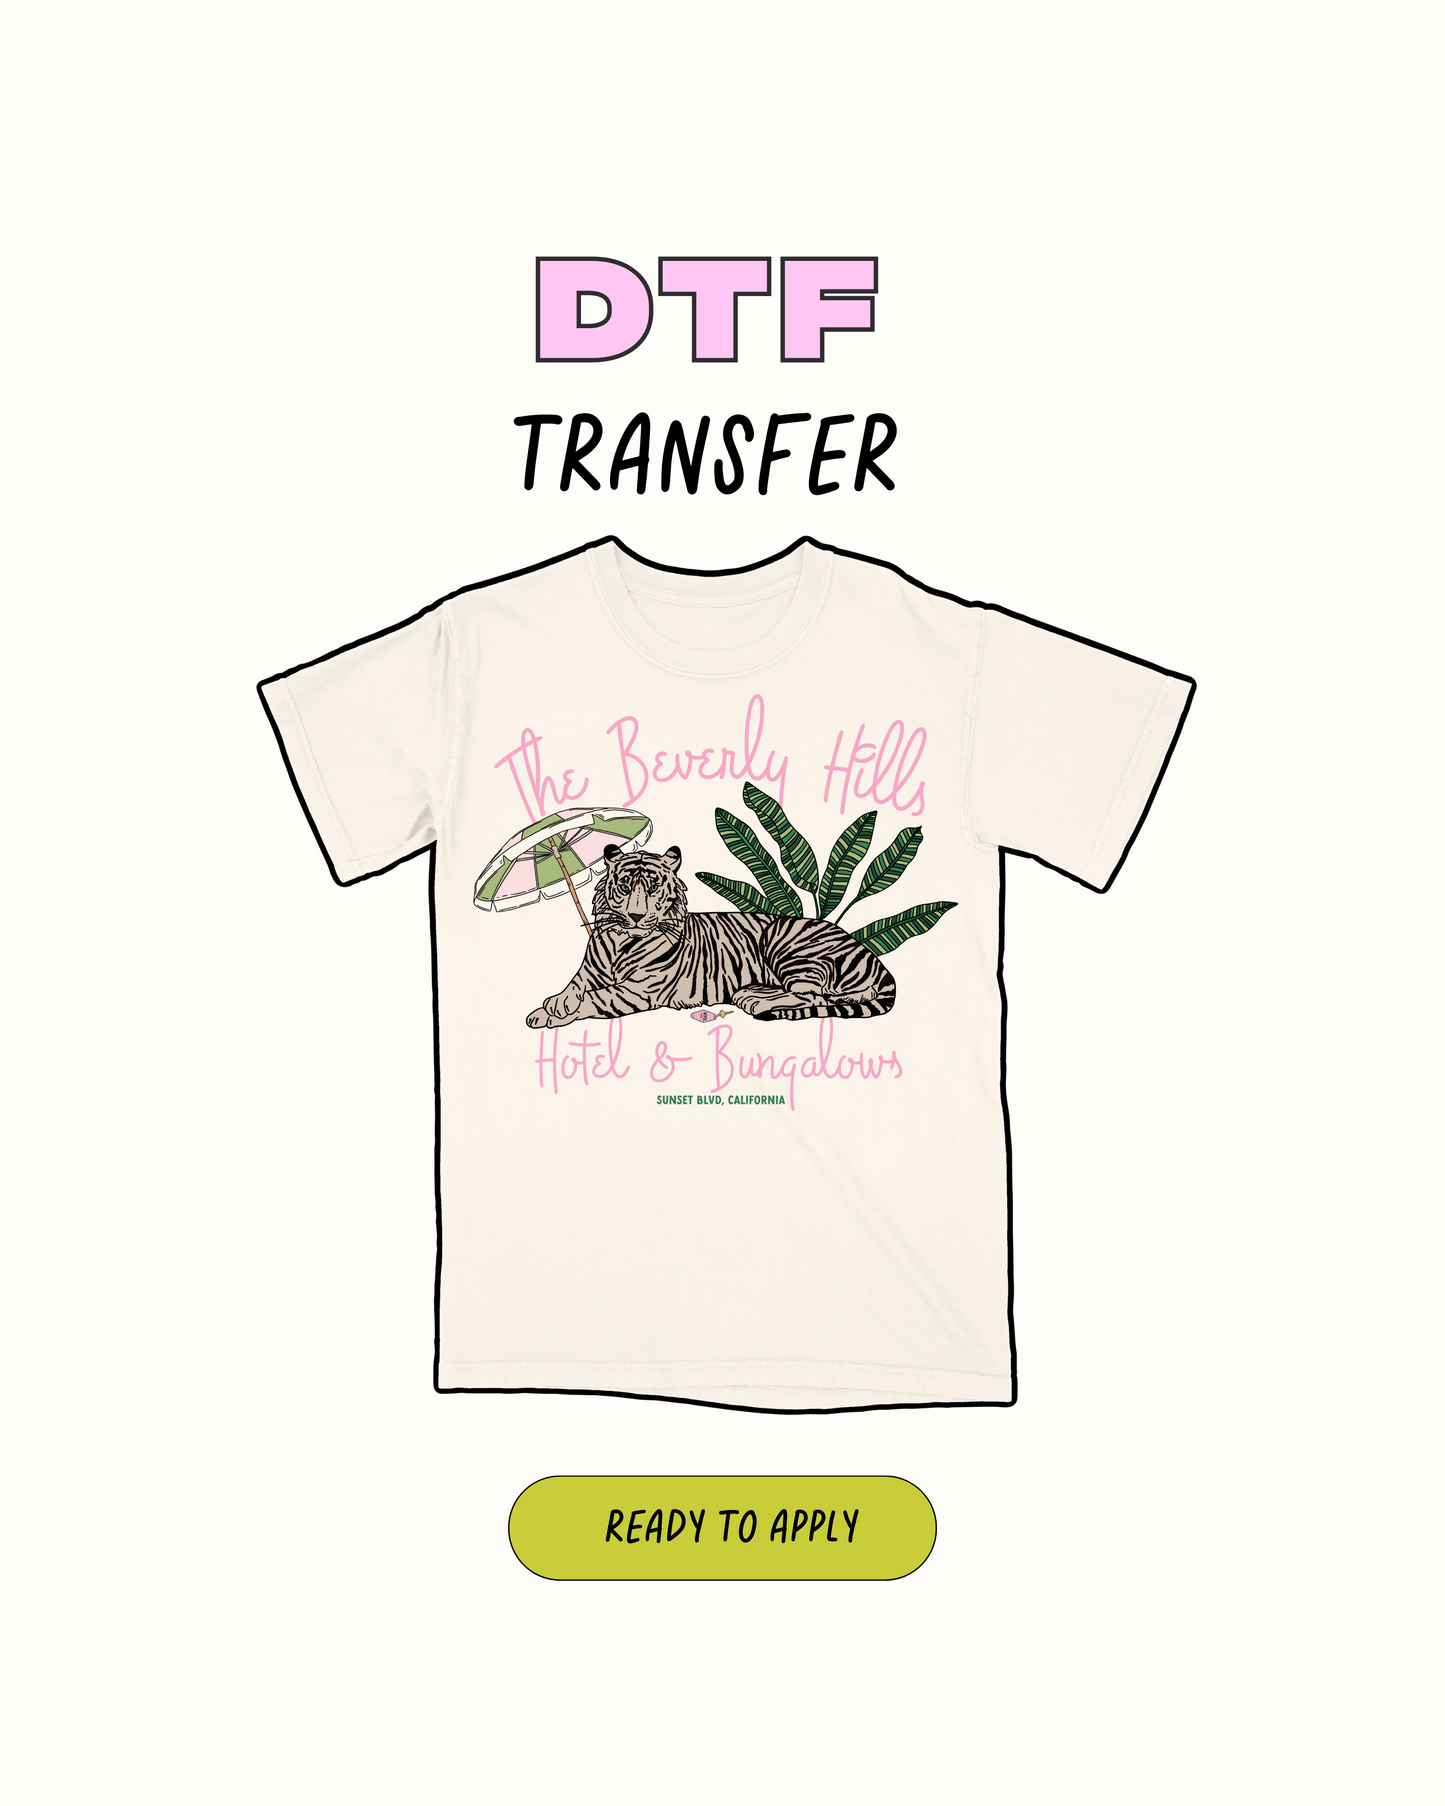 The Beverly Hills - DTF Transfer